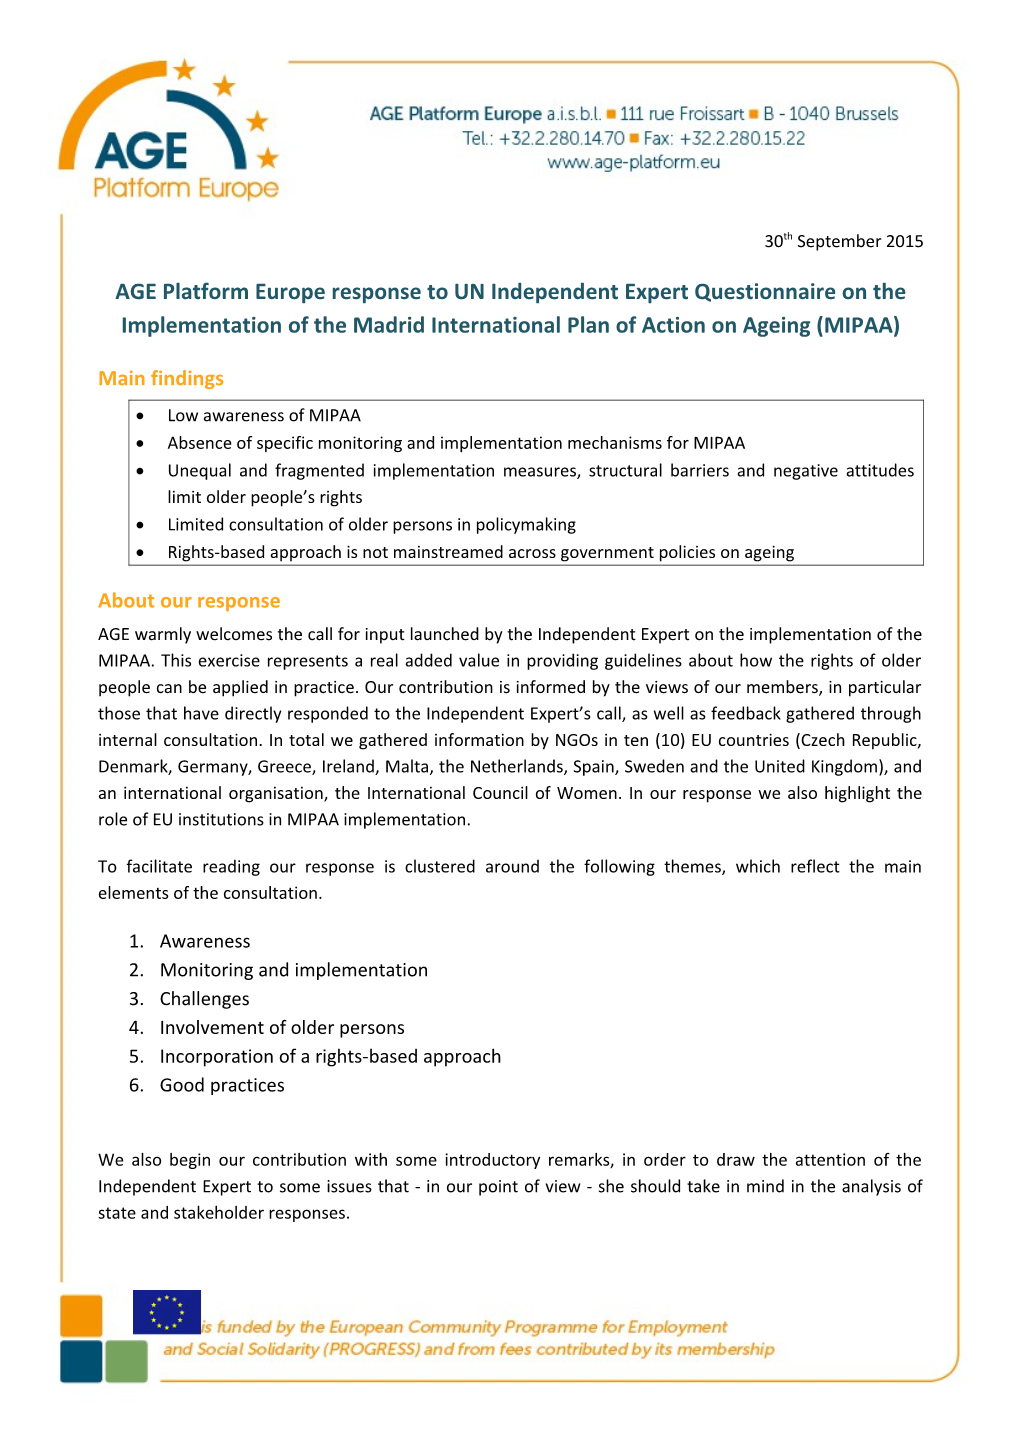 AGE Platform Europe Response to UN Independent Expert Questionnaire on the Implementation